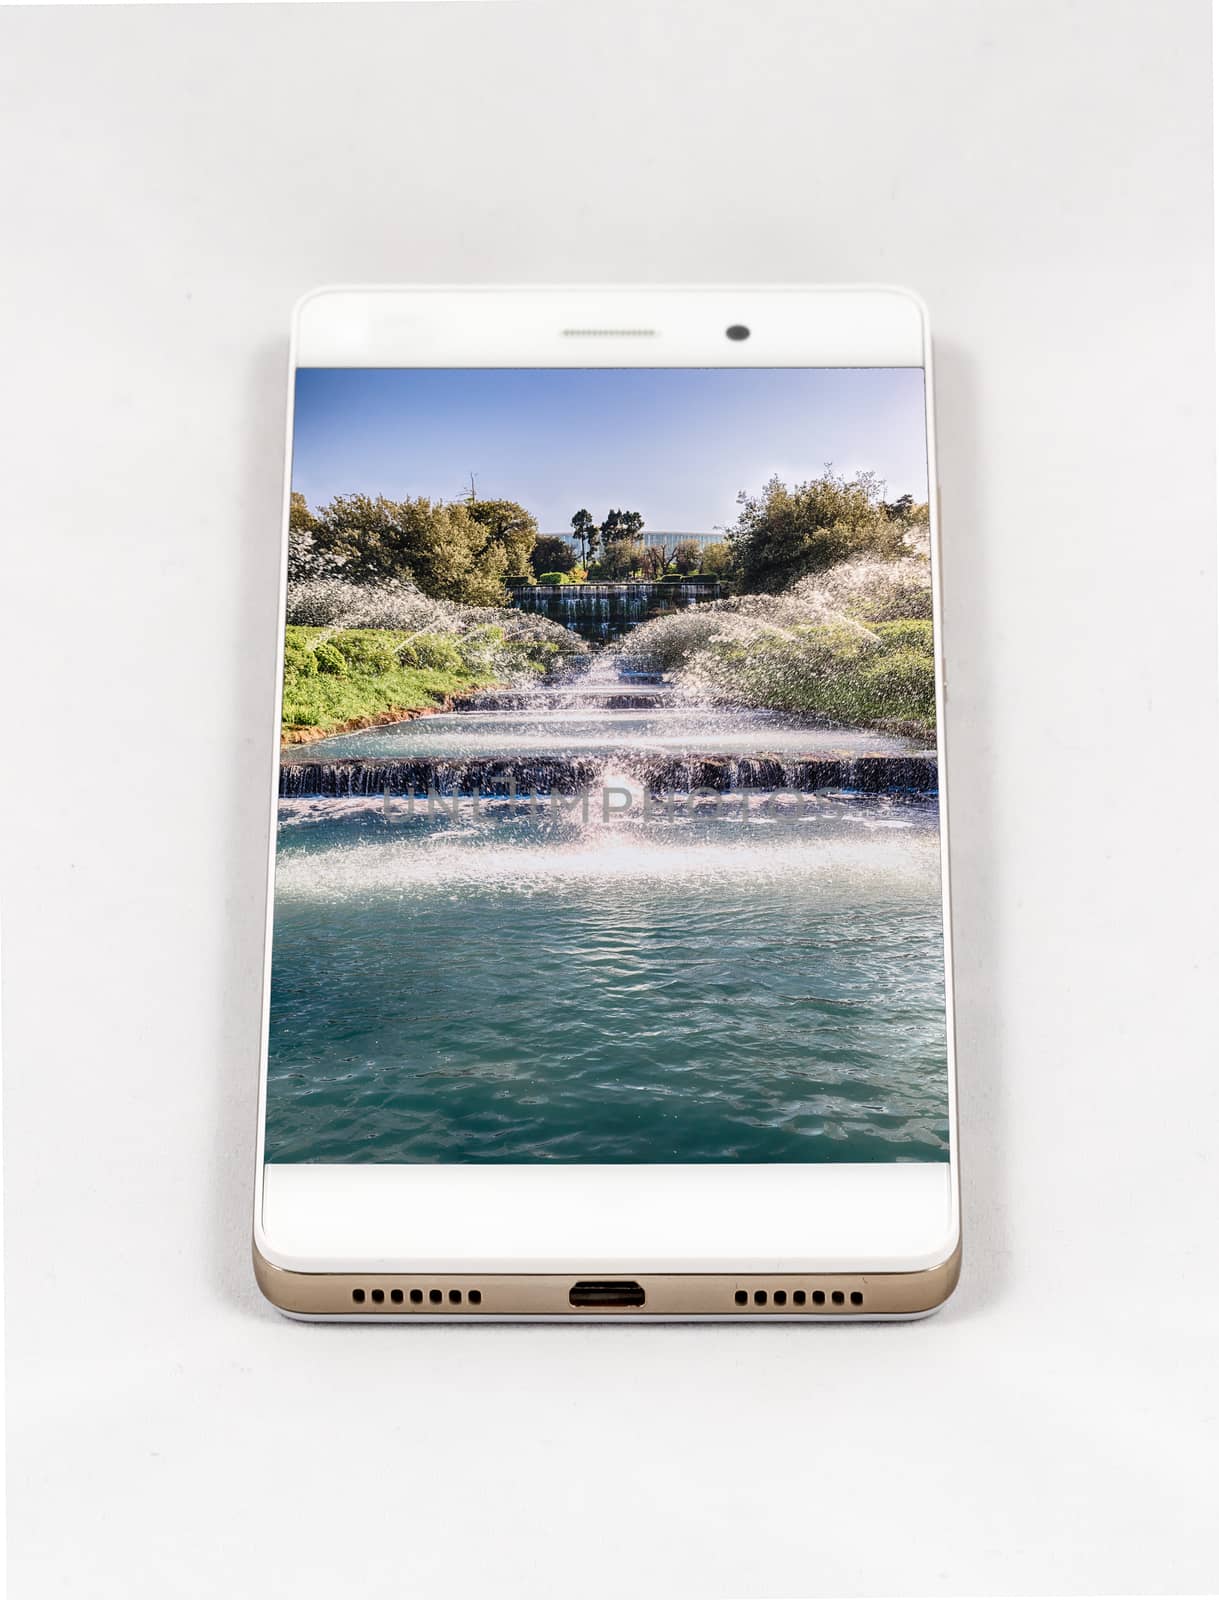 Modern smartphone with full screen picture of waterfall in Rome, Italy. Concept for travel smartphone photography. All images in this composition are made by me and separately available on my portfolio